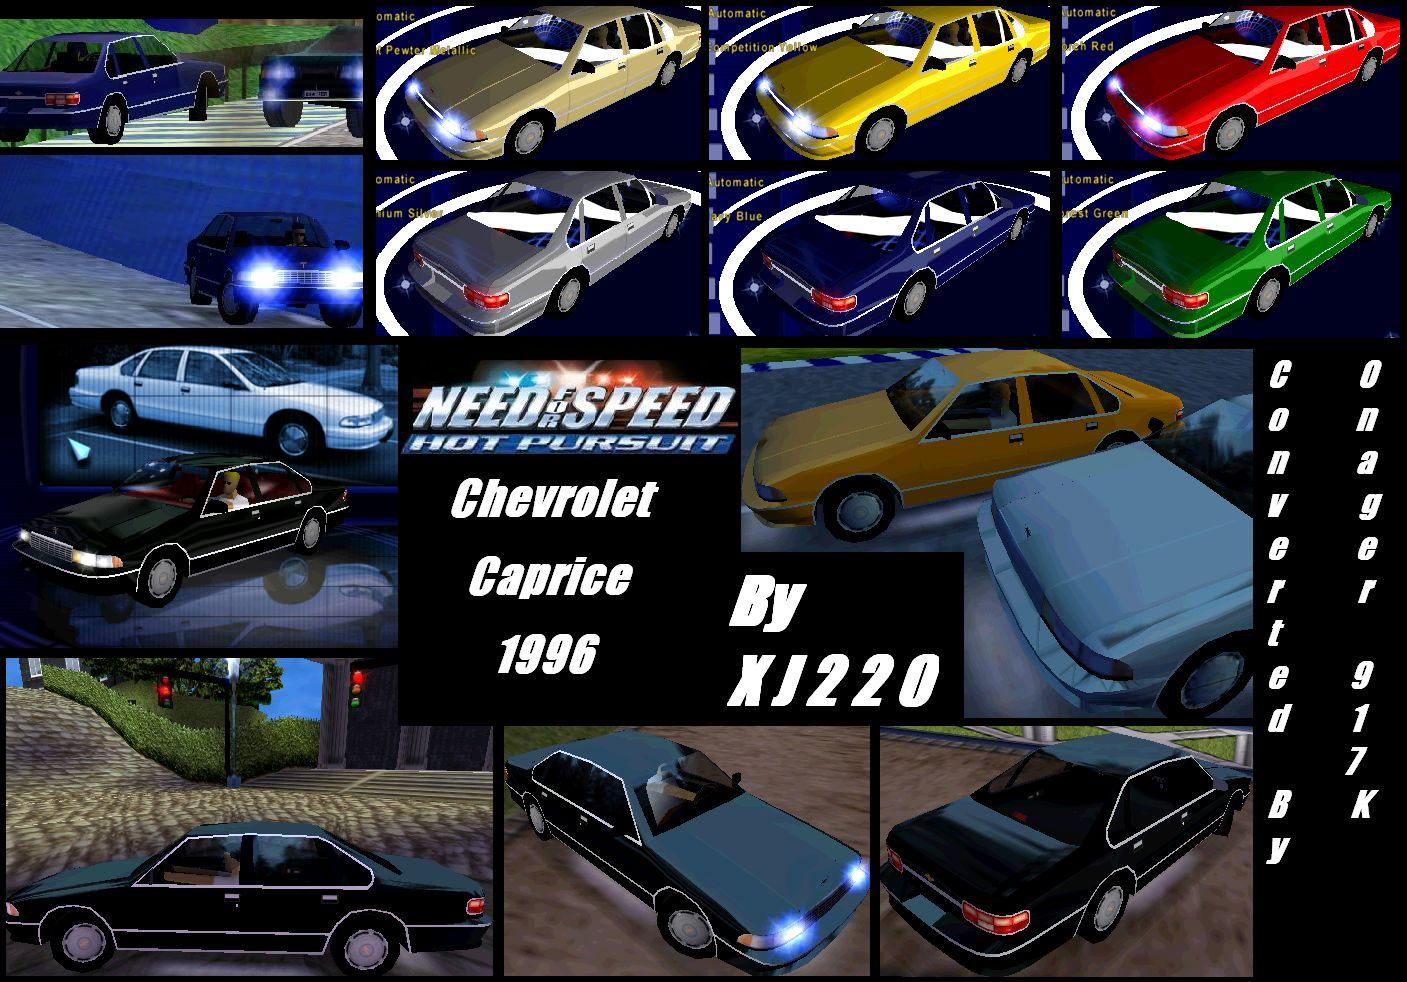 Need For Speed Hot Pursuit Chevrolet Caprice 1996